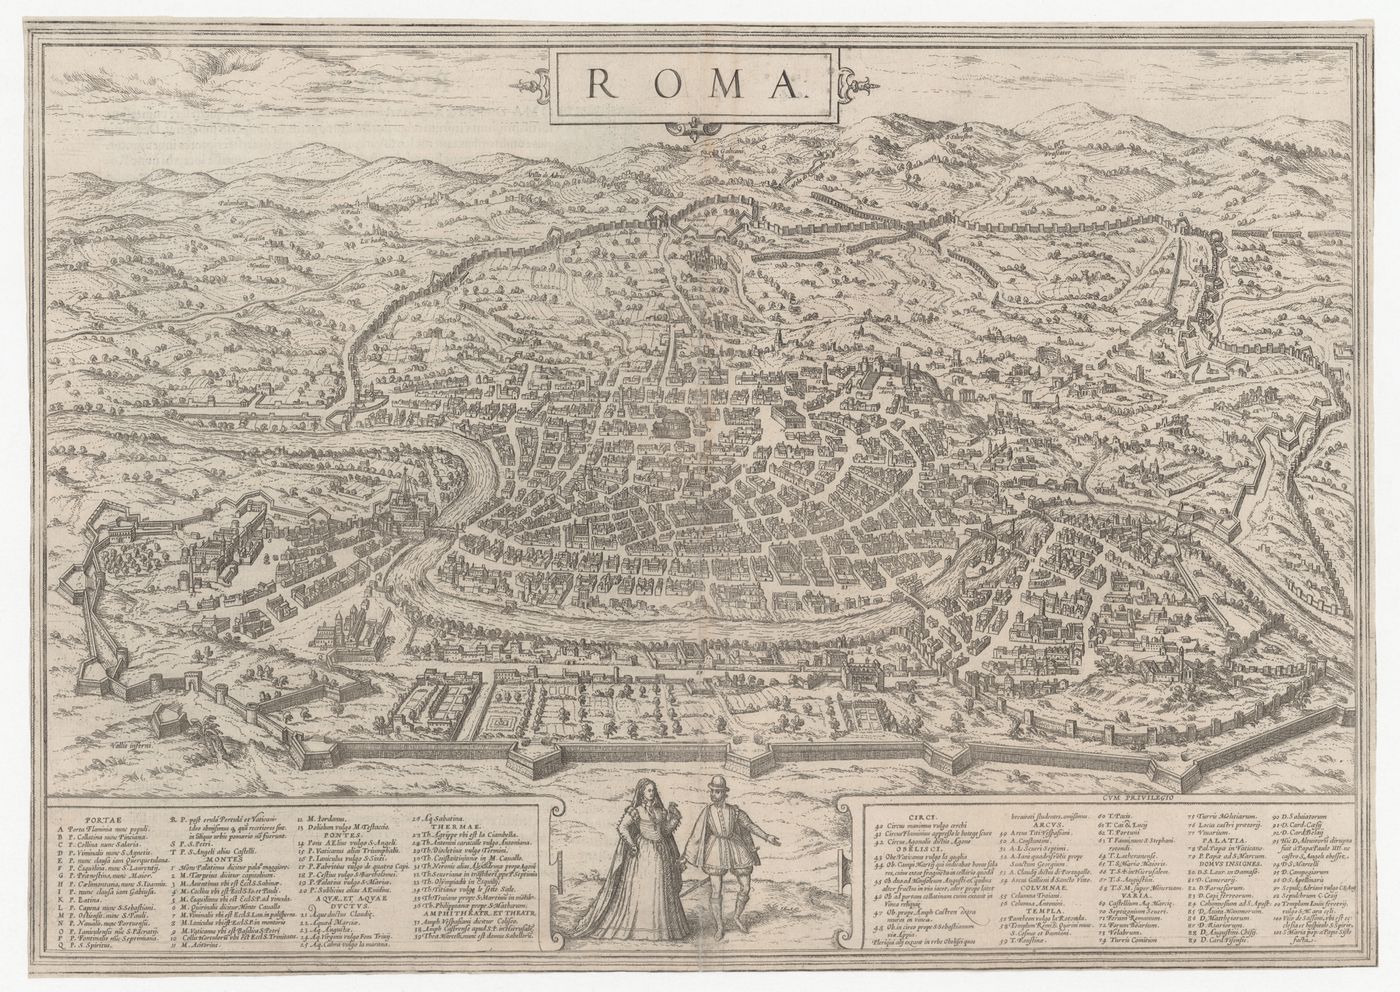 A map of modern Rome, Italy